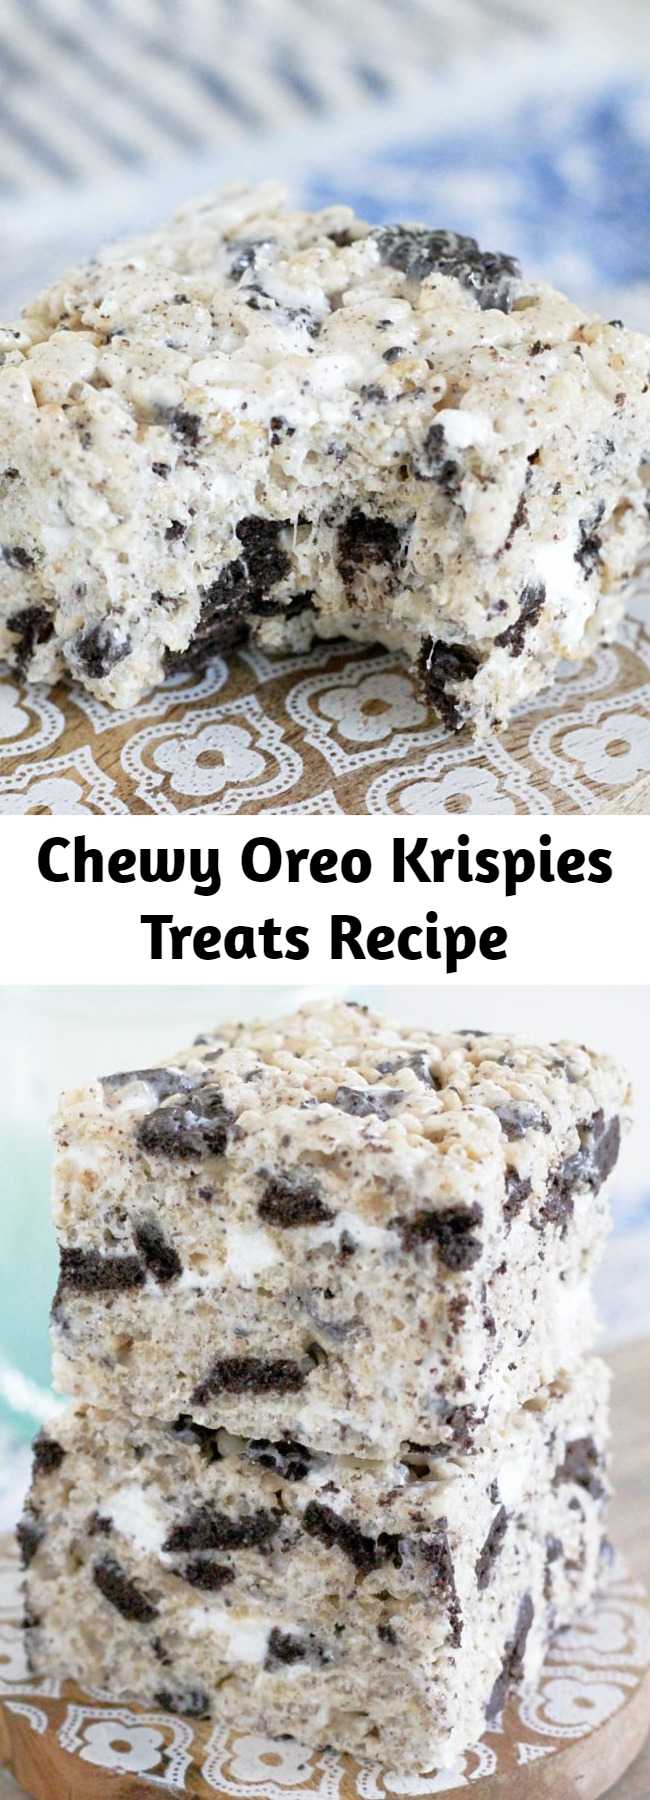 Chewy Oreo Krispies Treats Recipe - This is the classic Krispie treat recipe on steroids with the addition of crushed OREO cookies. Thick, chewy and completely irresistible. #ricekrispietreats #oreokrispies